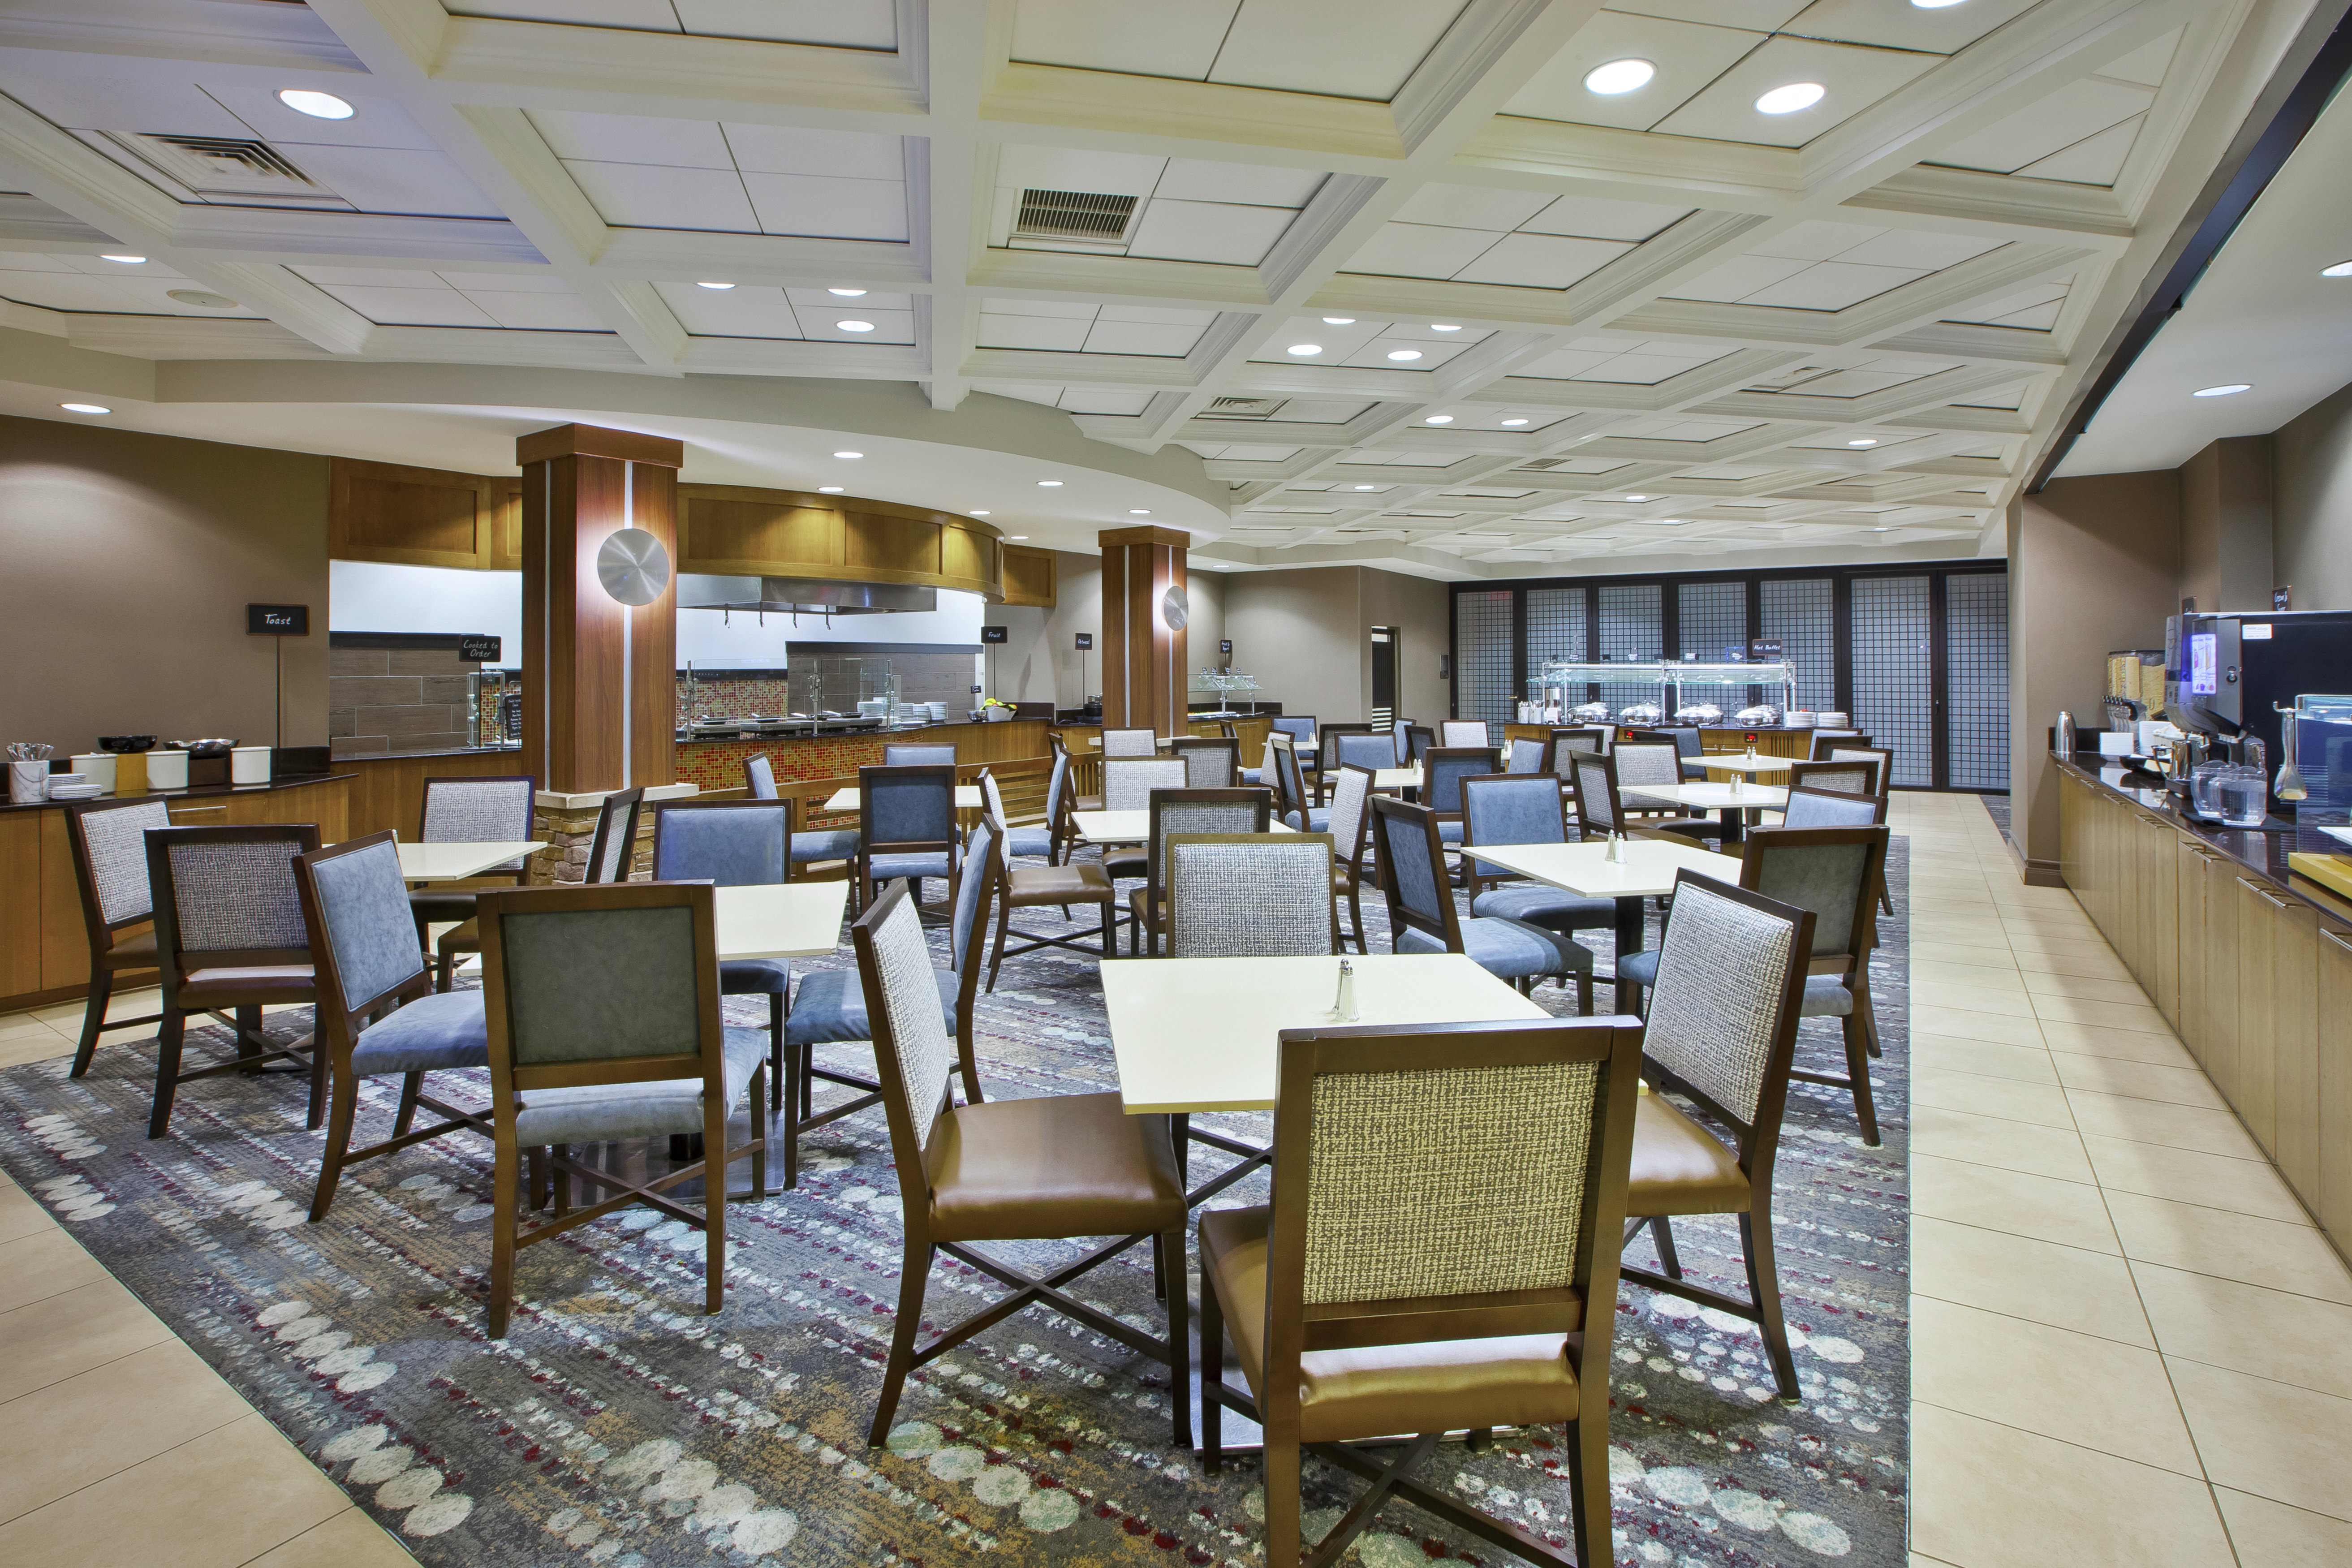 Tables, Chairs and Food Service Area in Breakfast Dining Area